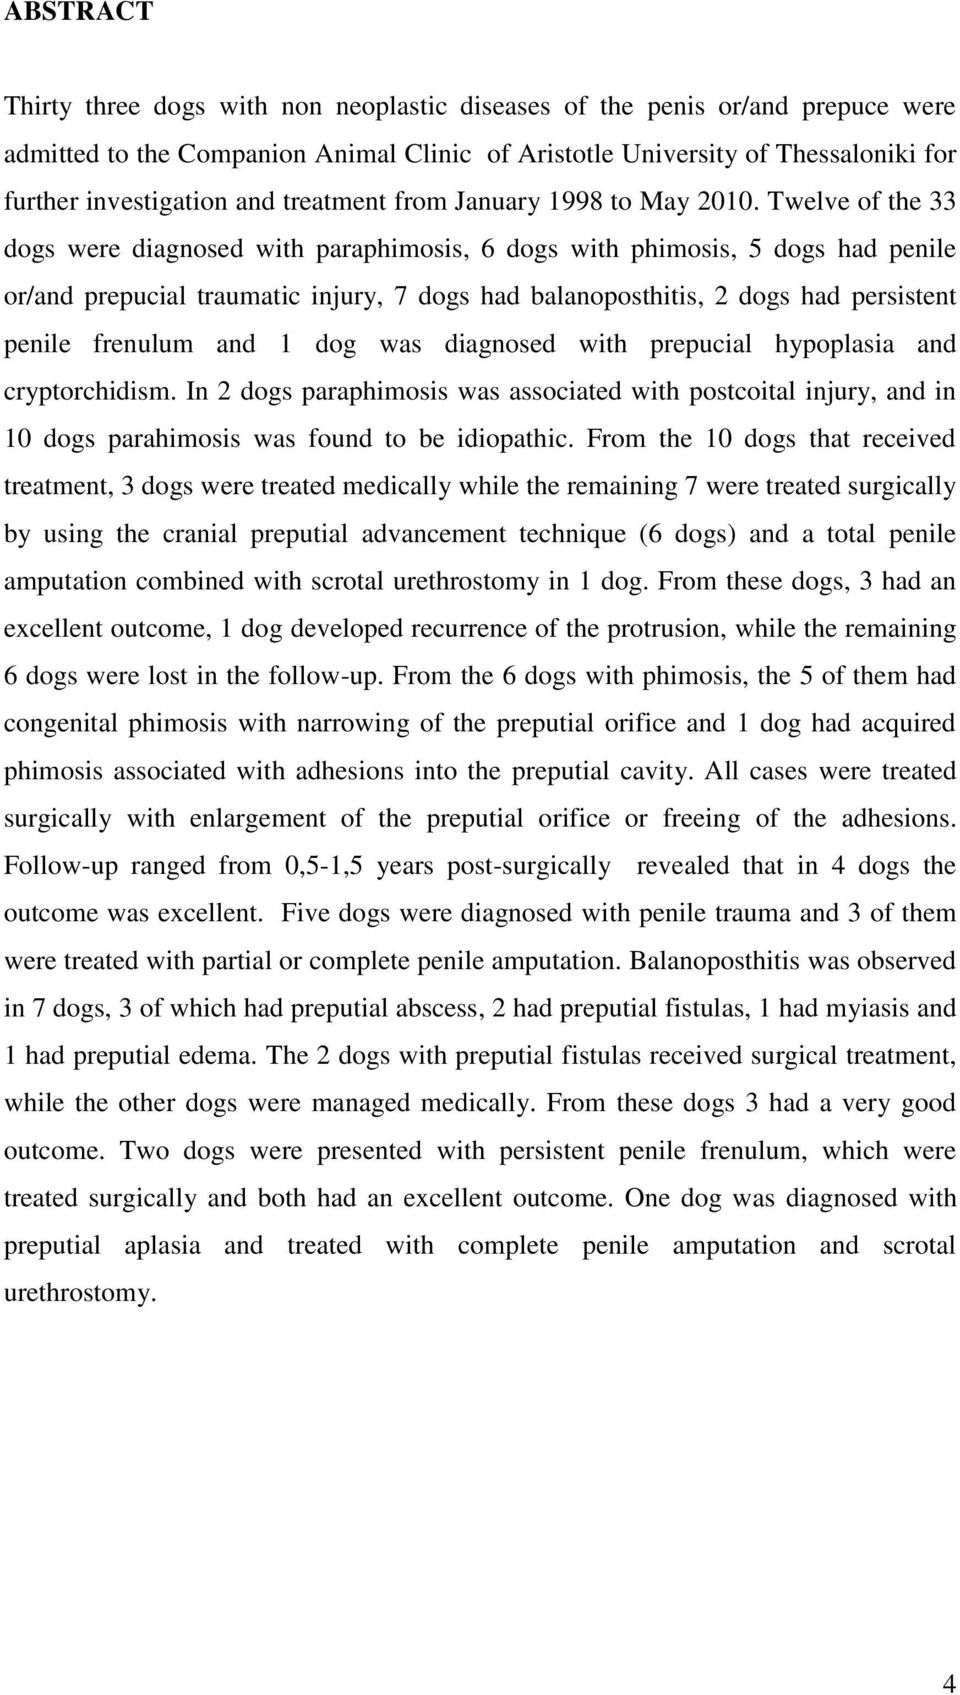 Twelve of the 33 dogs were diagnosed with paraphimosis, 6 dogs with phimosis, 5 dogs had penile or/and prepucial traumatic injury, 7 dogs had balanoposthitis, 2 dogs had persistent penile frenulum